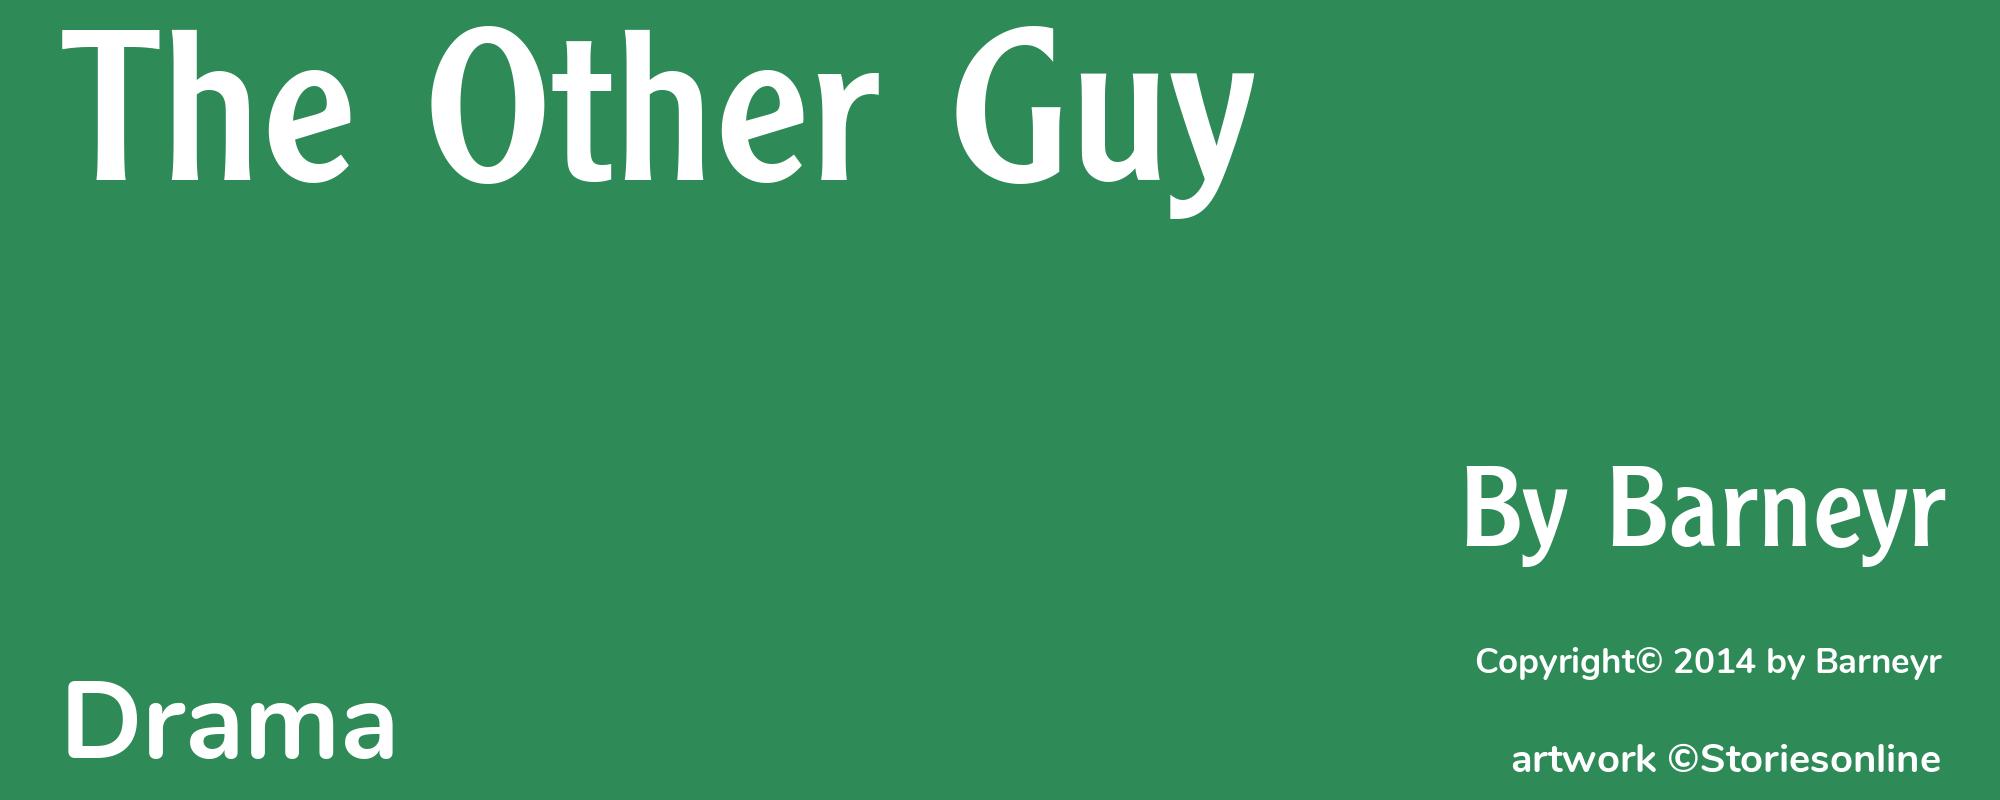 The Other Guy - Cover